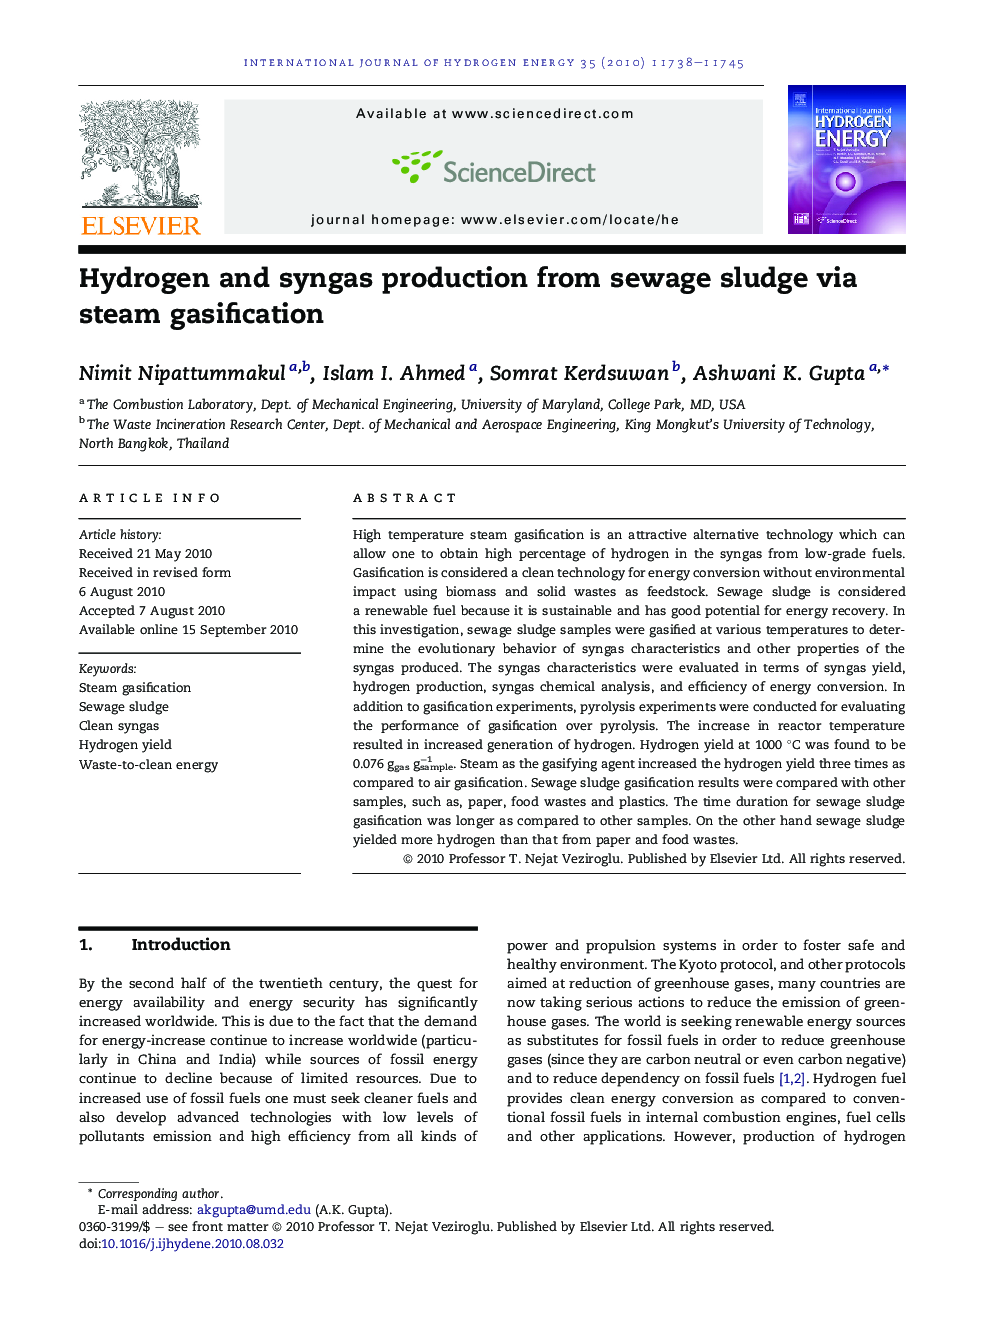 Hydrogen and syngas production from sewage sludge via steam gasification